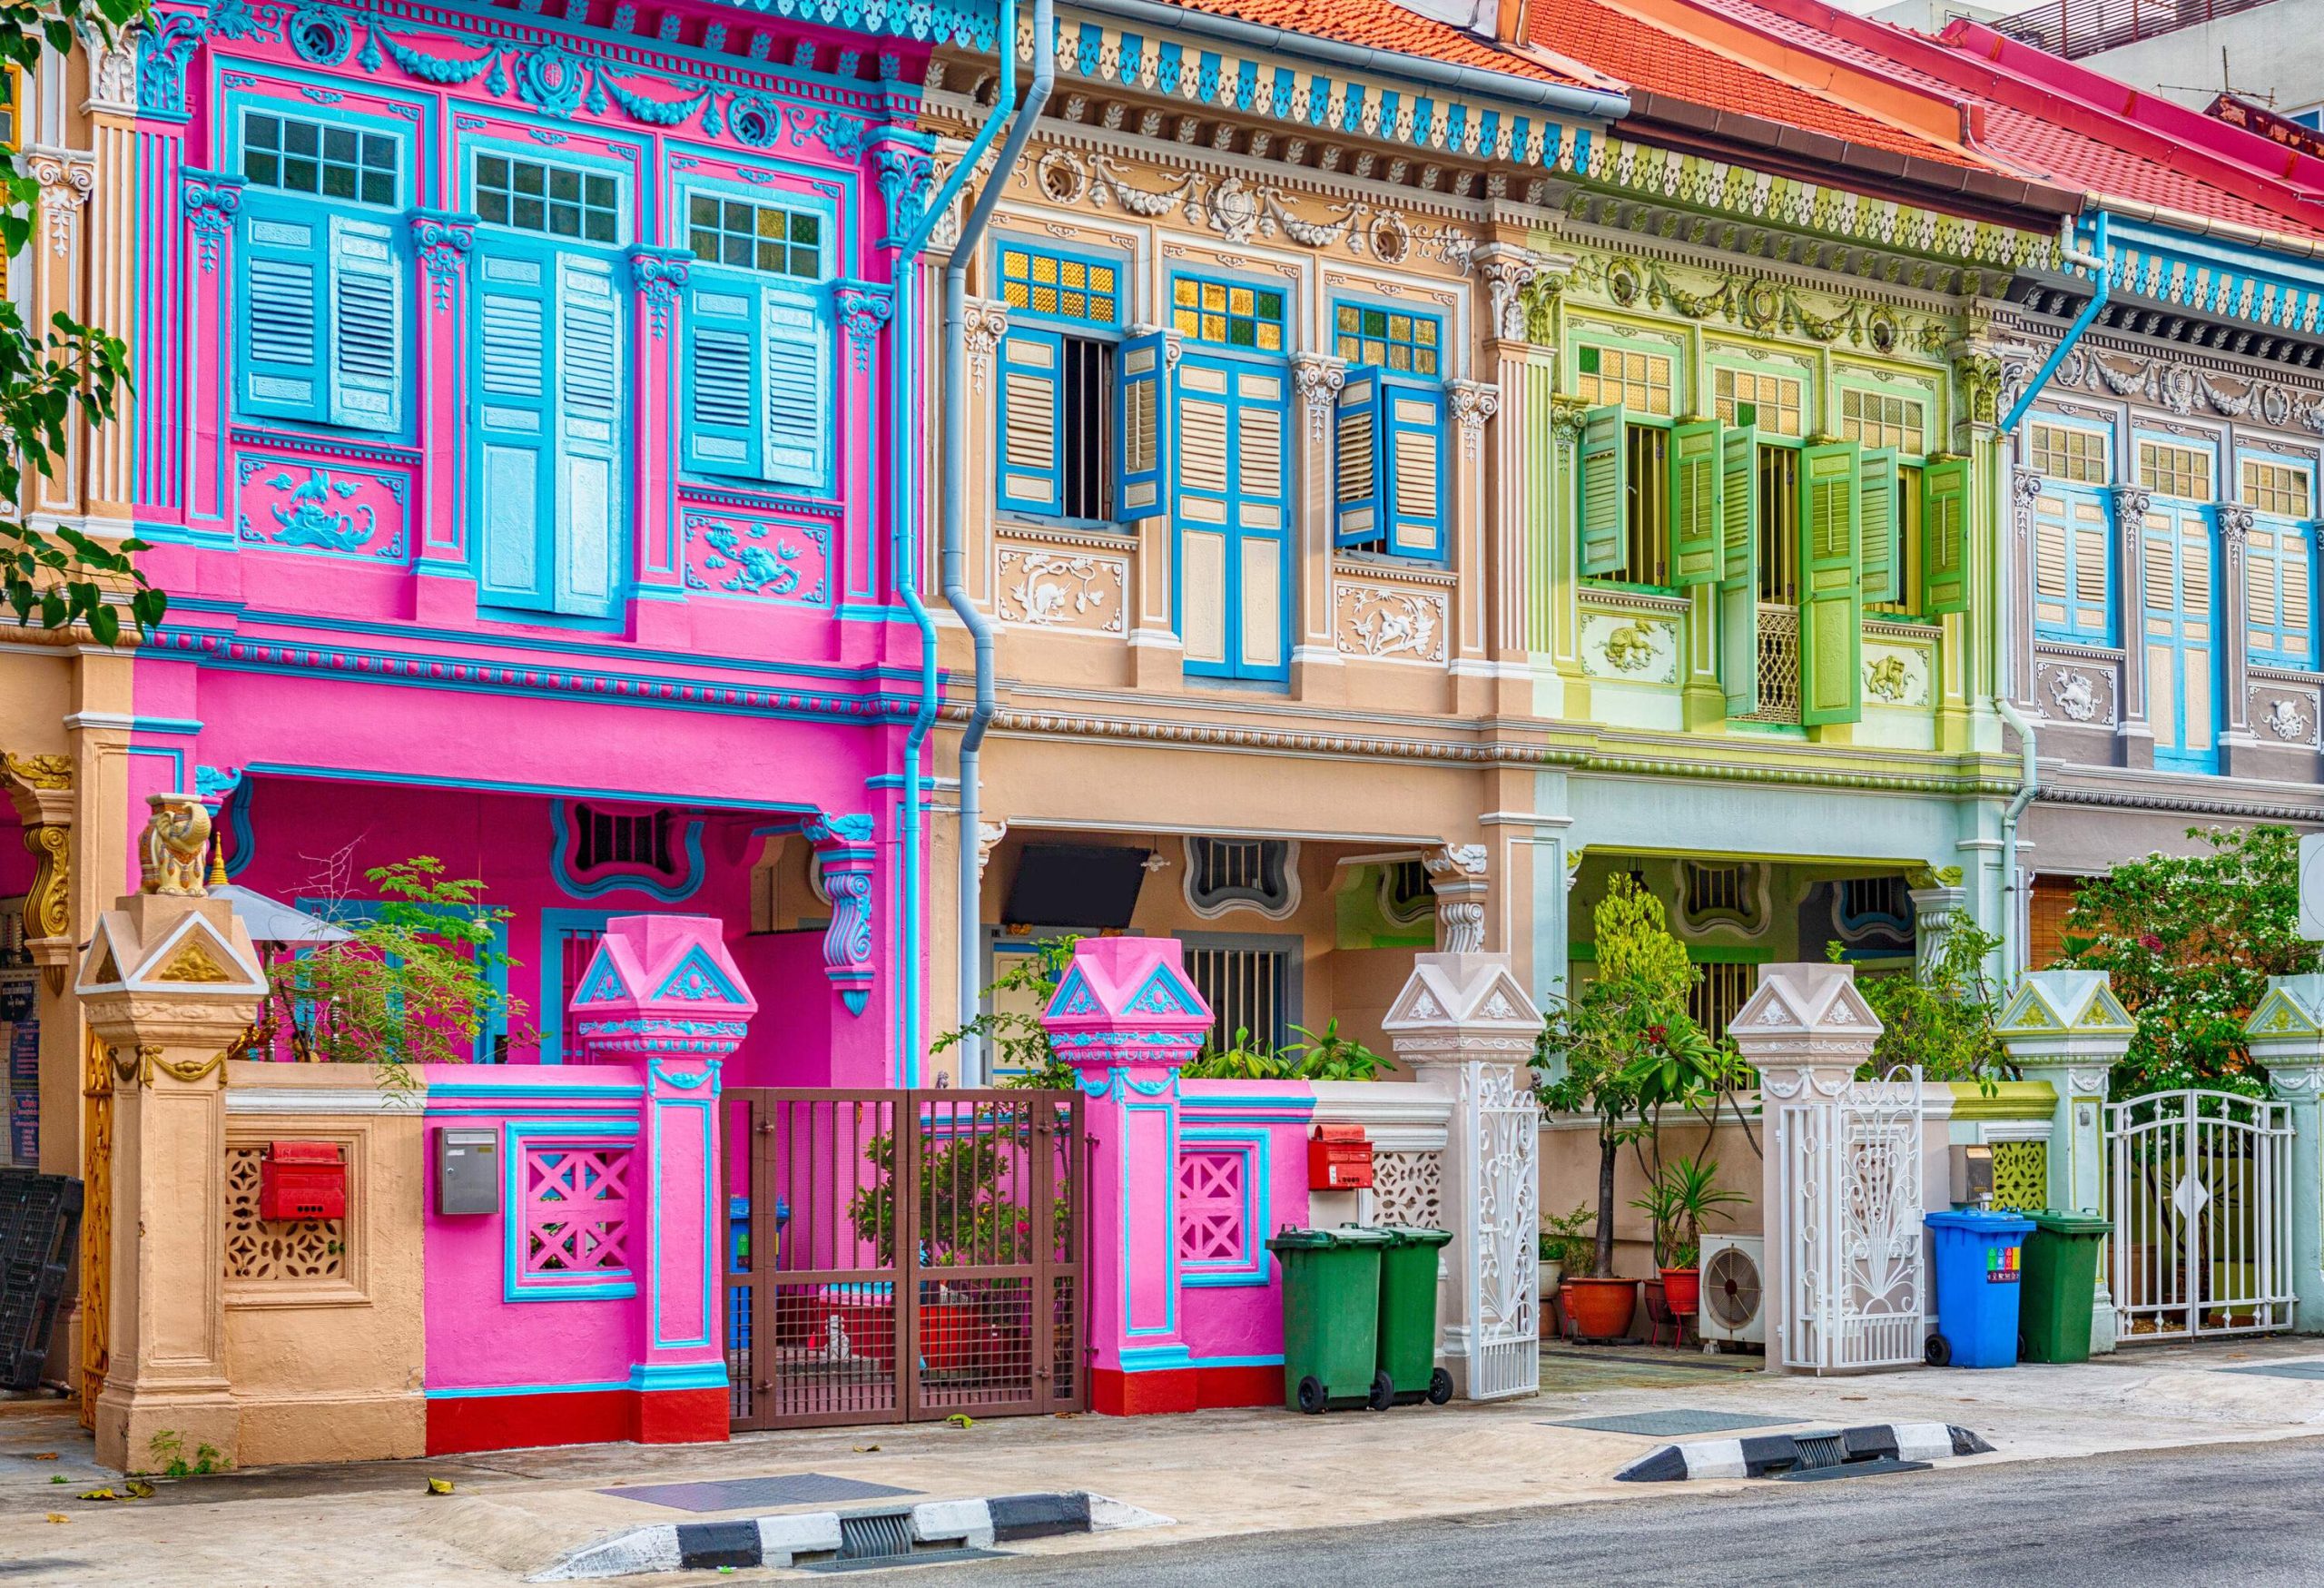 Colourful two-story buildings create a vibrant tapestry as they line the street.